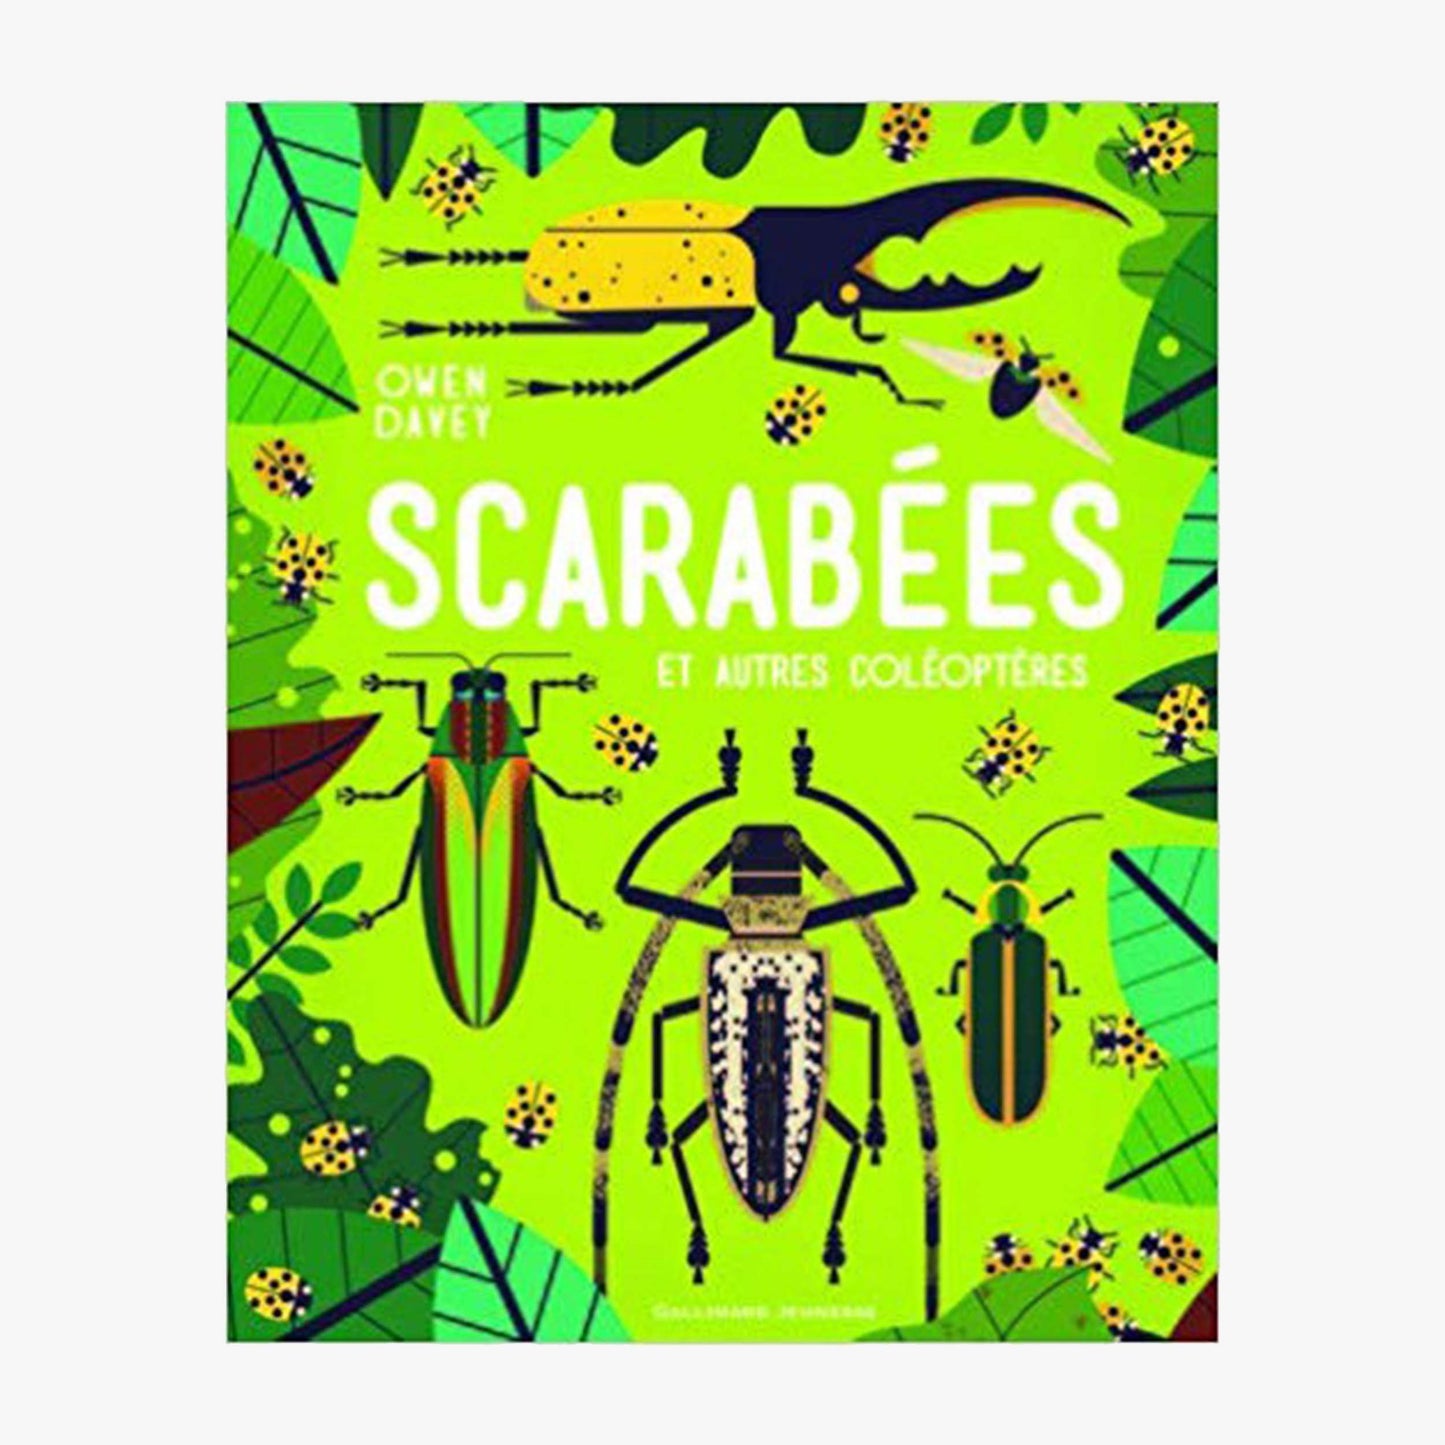 SCARABEES